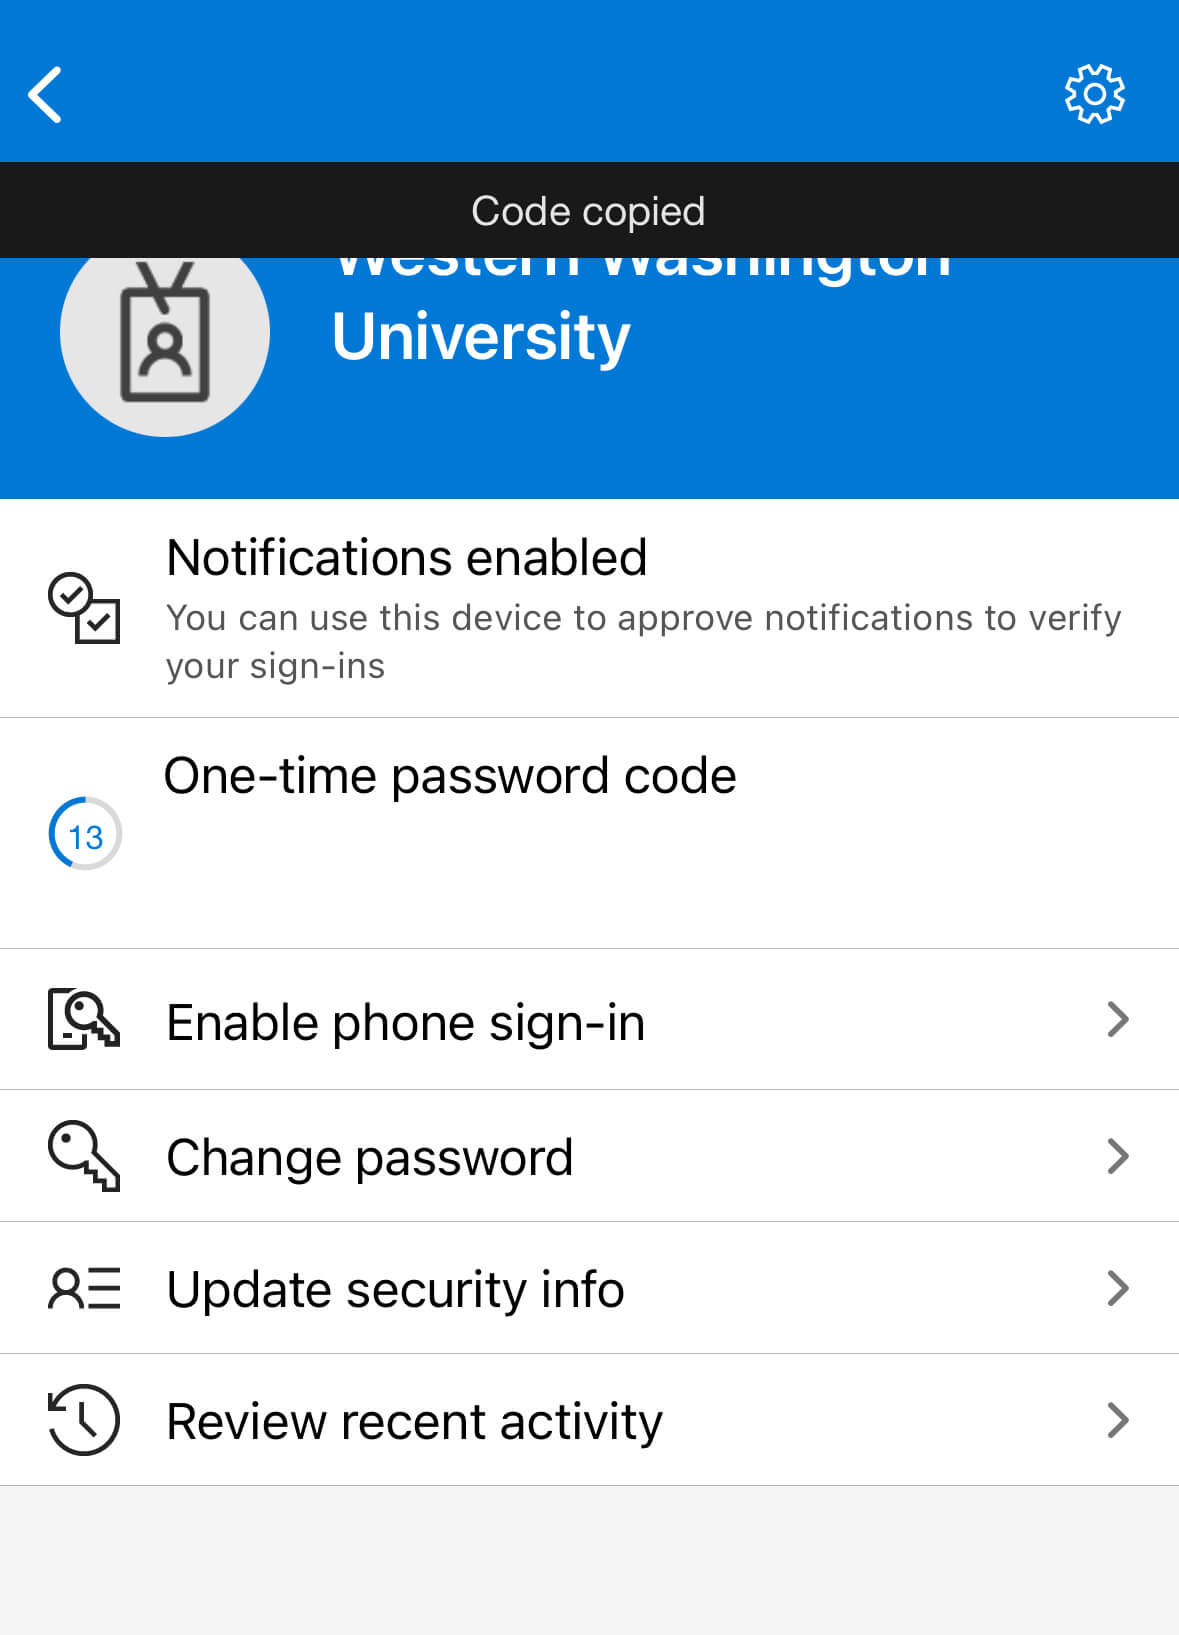 Microsoft authenticator shows an update that one time code is copied